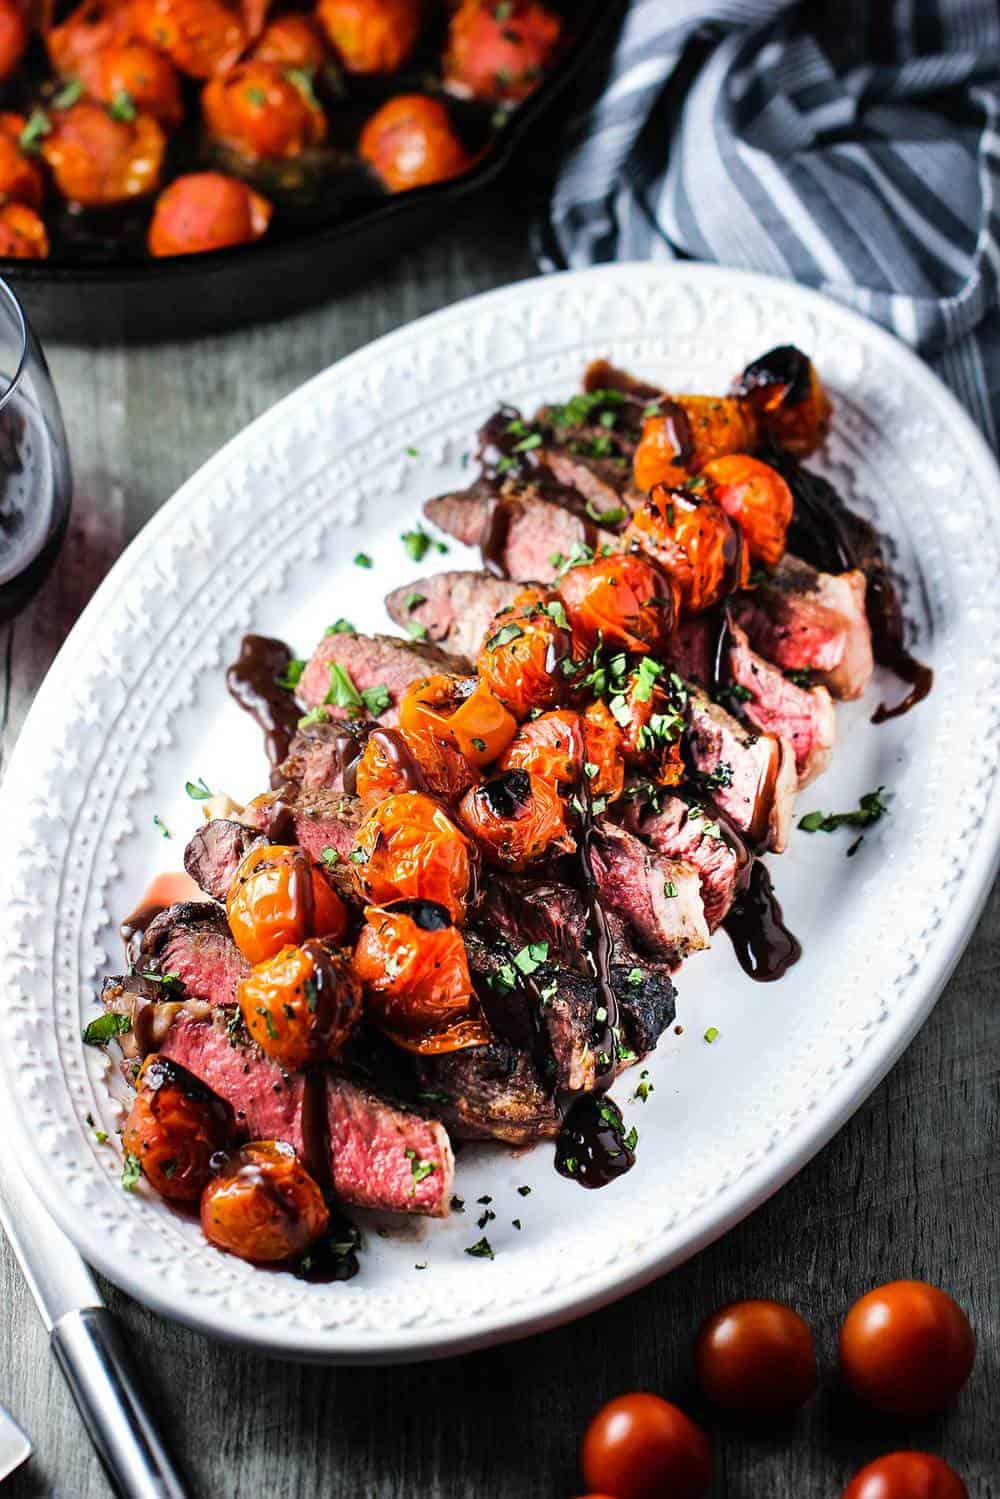 Sliced ribeye steak on a platter with roasted tomatoes and borderalaise sauce